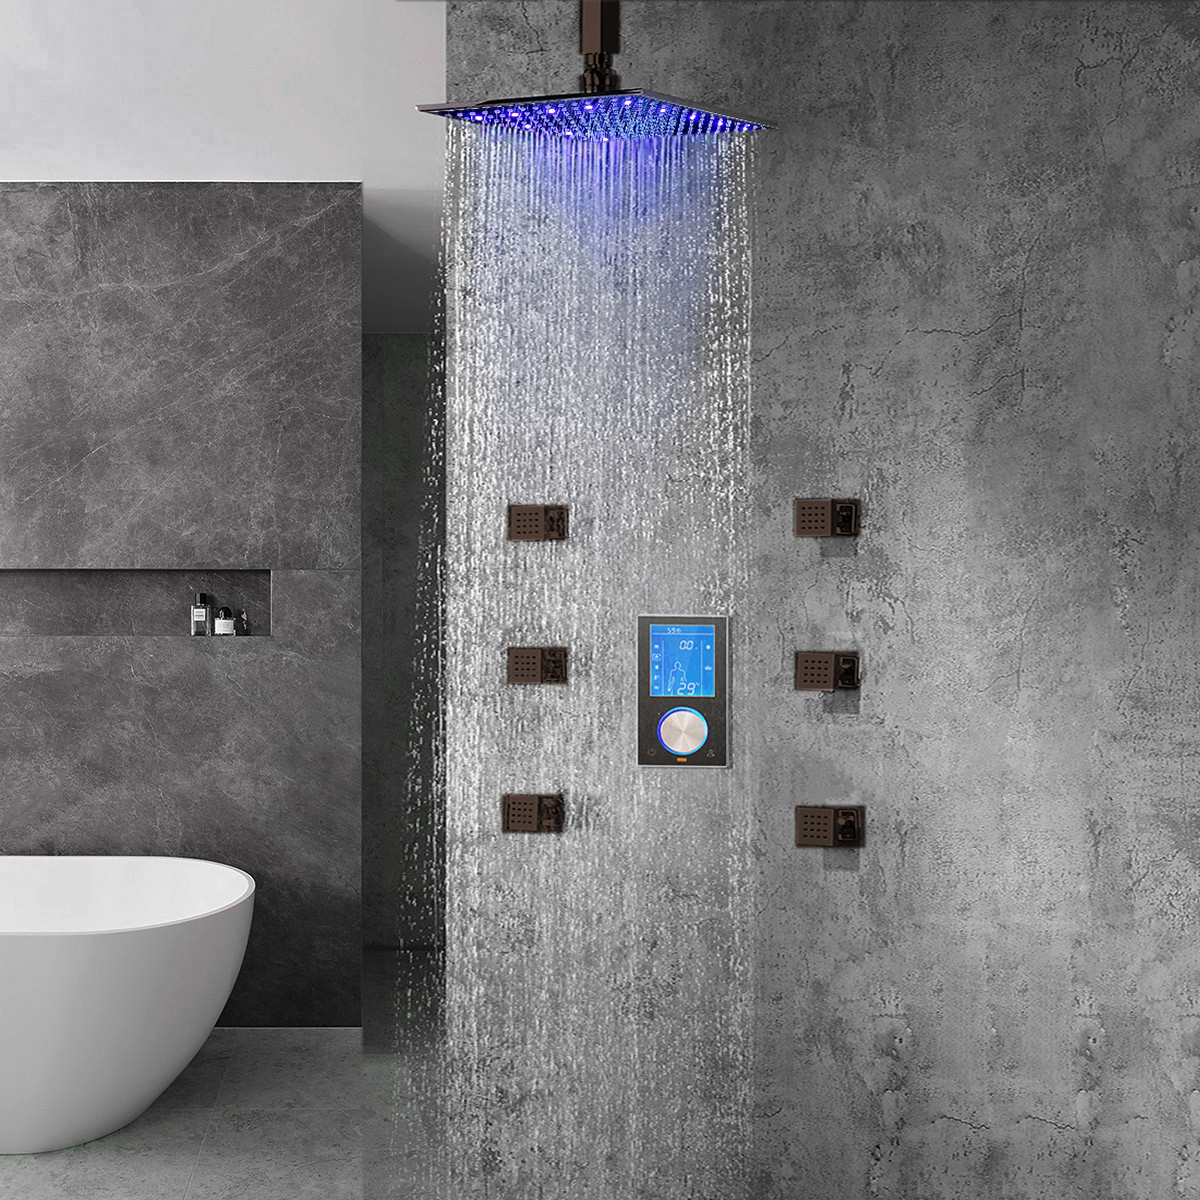 Lano Multi Color LED Rain Shower Head With Digital Mixer And 360° Adjustable Body Jets